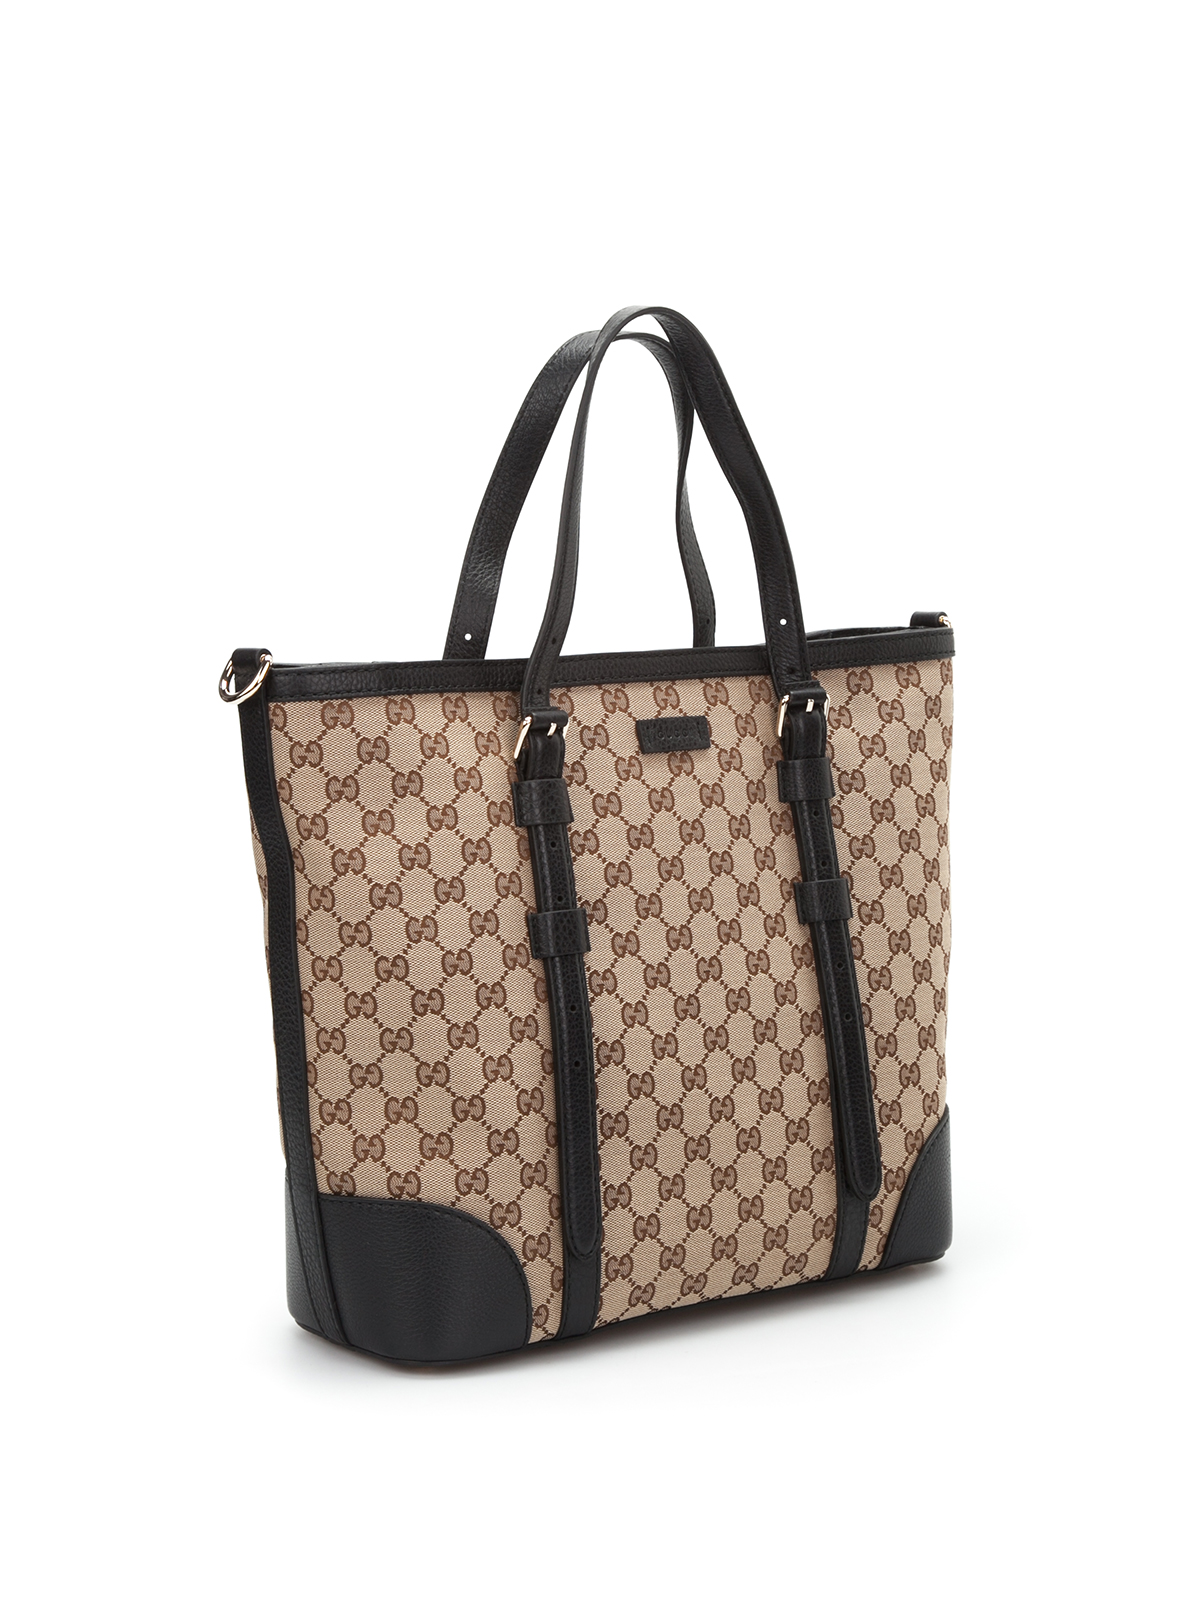 GG classic tote by Gucci - totes bags | Shop online at www.paulmartinsmith.com - 387602 KQW1G 9769